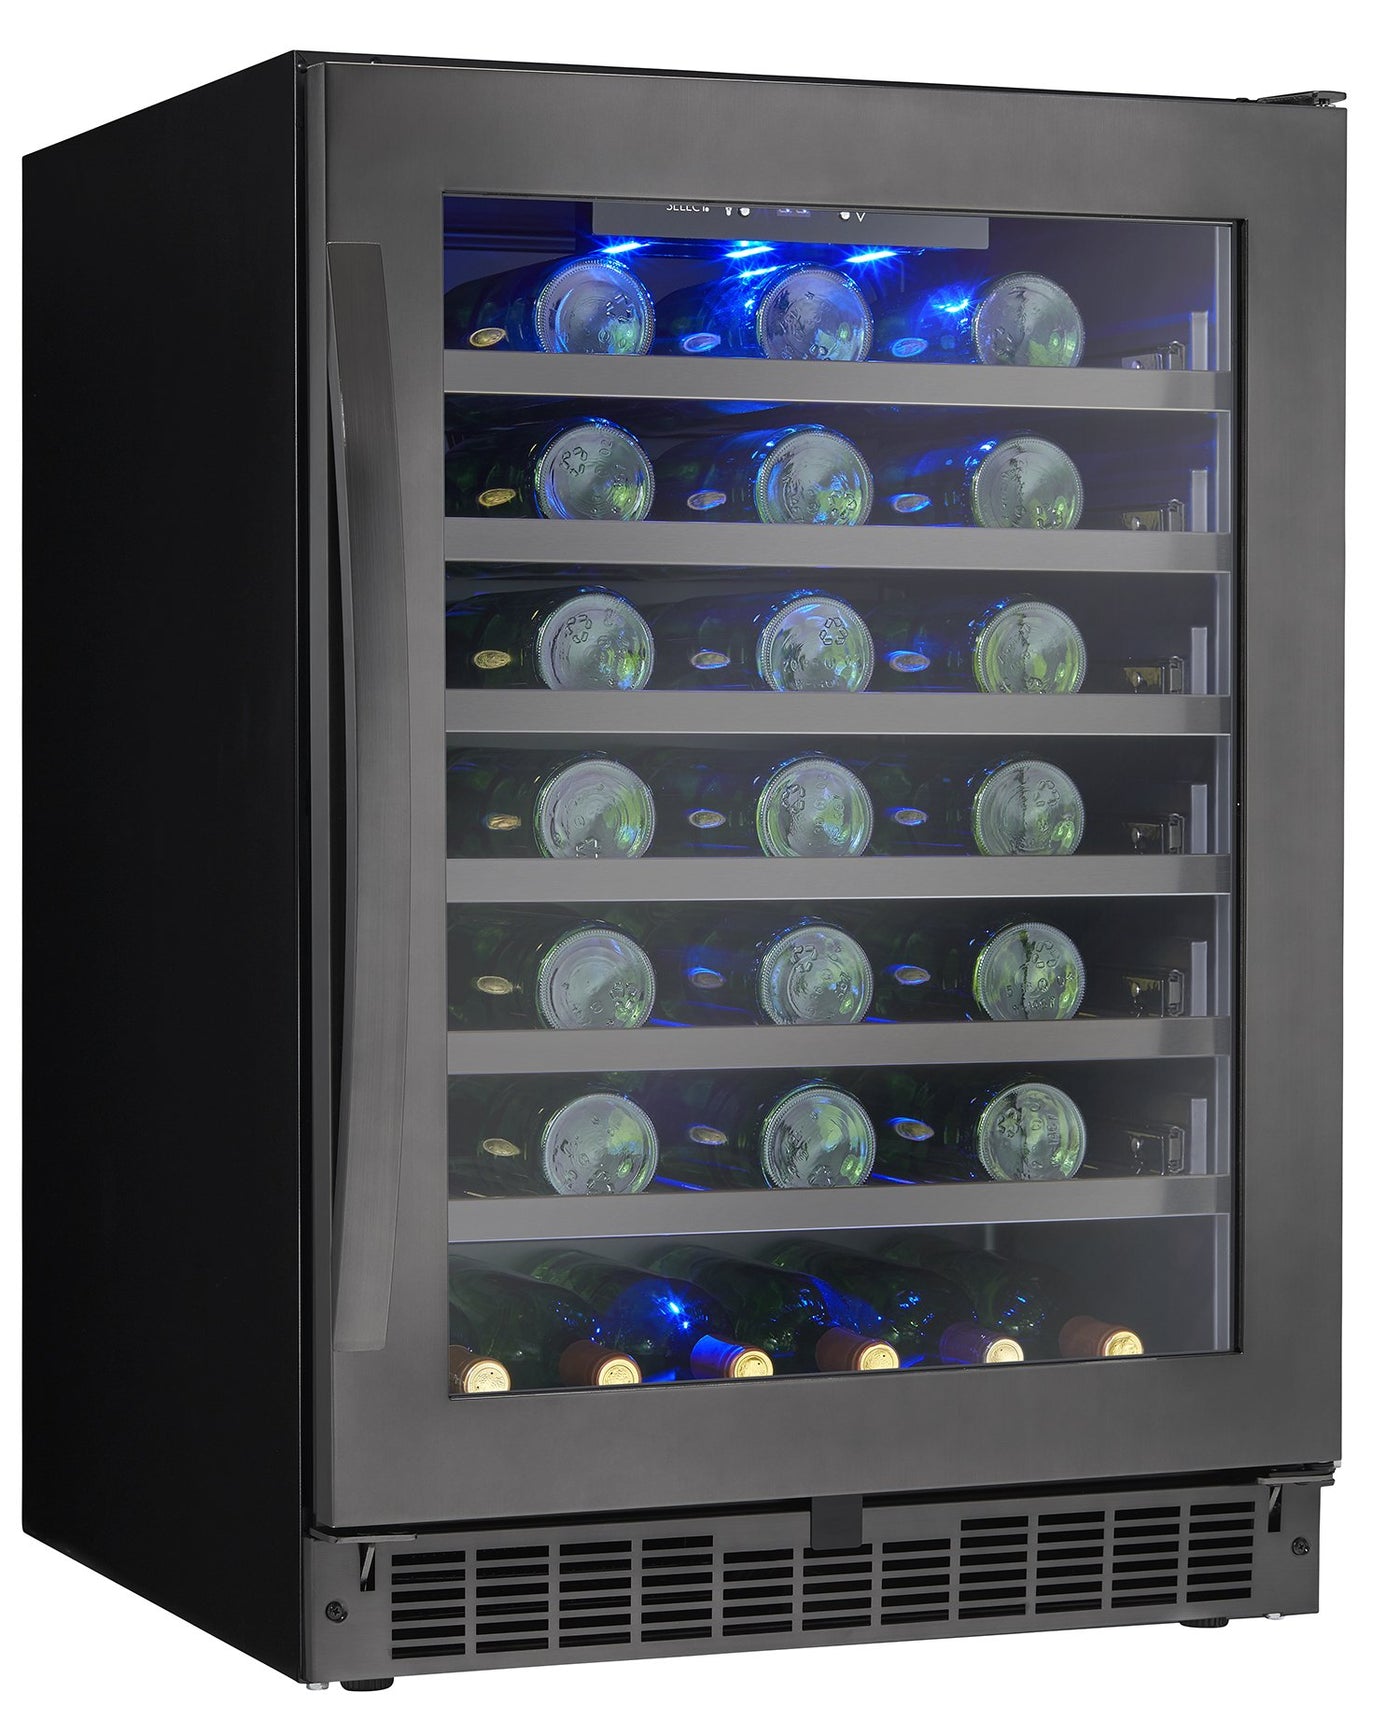 Danby Black Stainless Steel Wine Cooler (5.6 Cu. Ft.) - SSWC056D1B-S